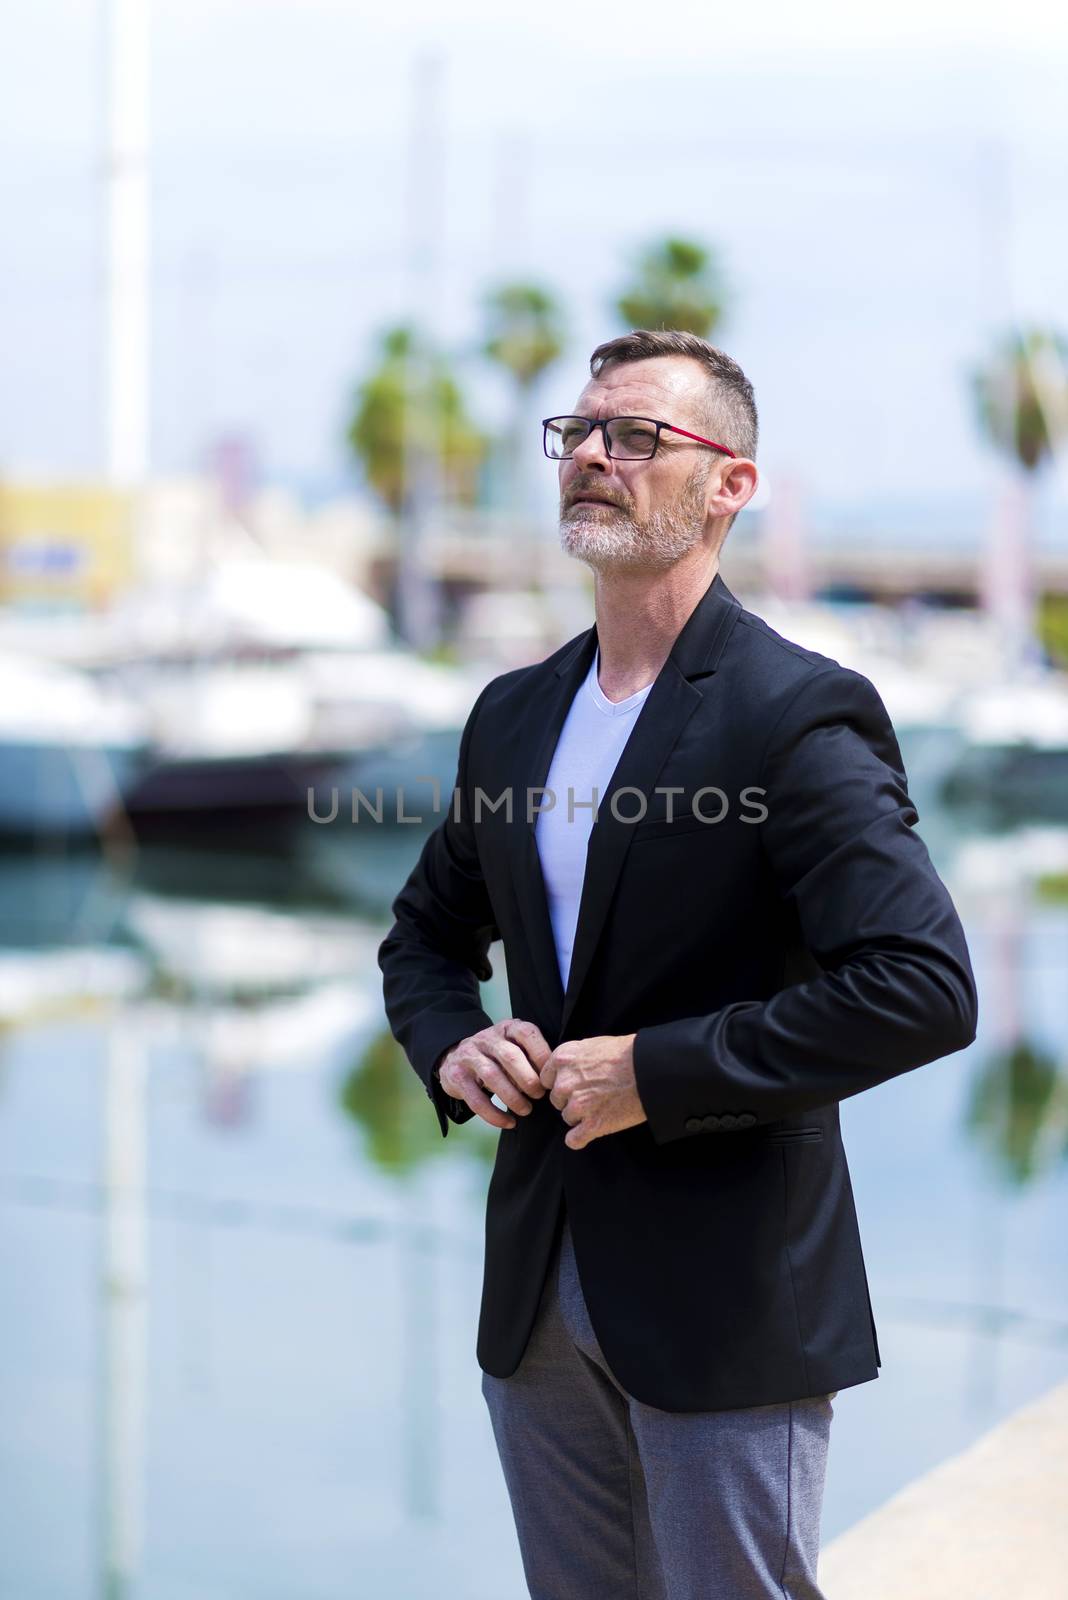 Mature businessman standing in the city looking sideways by raferto1973